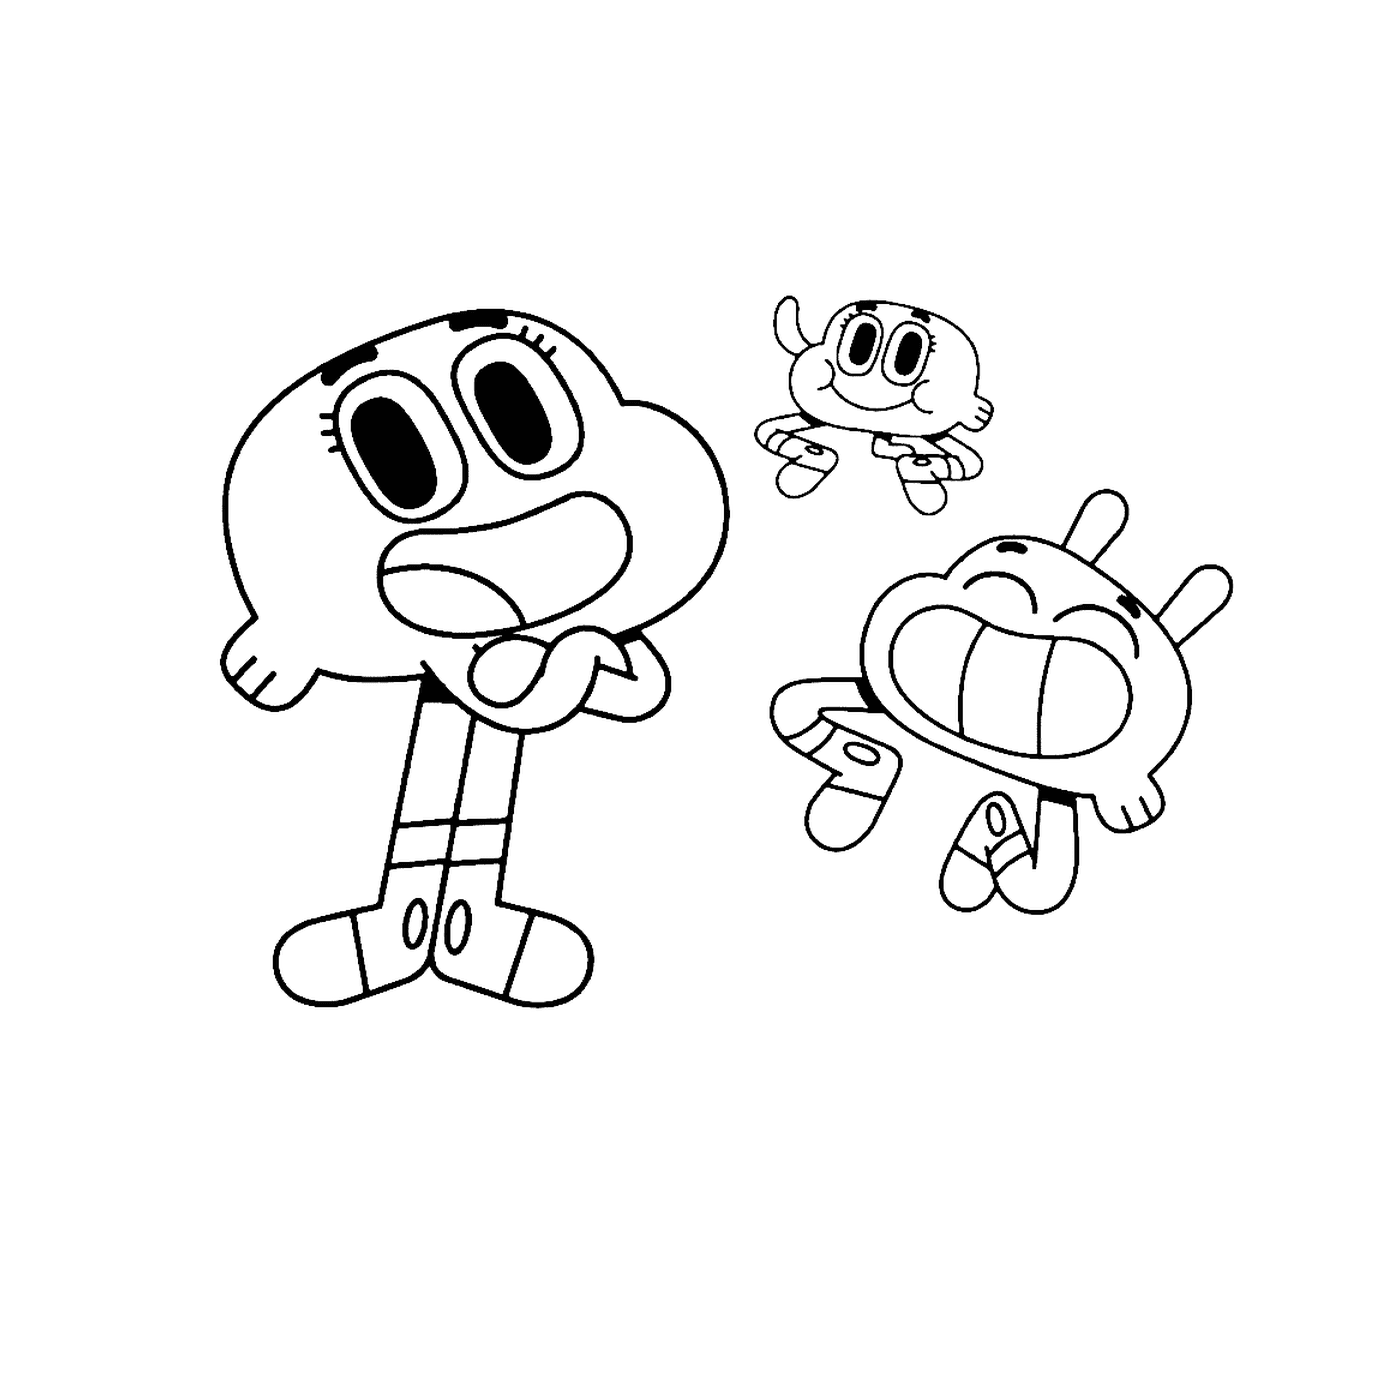  Gumball and his animated friends 